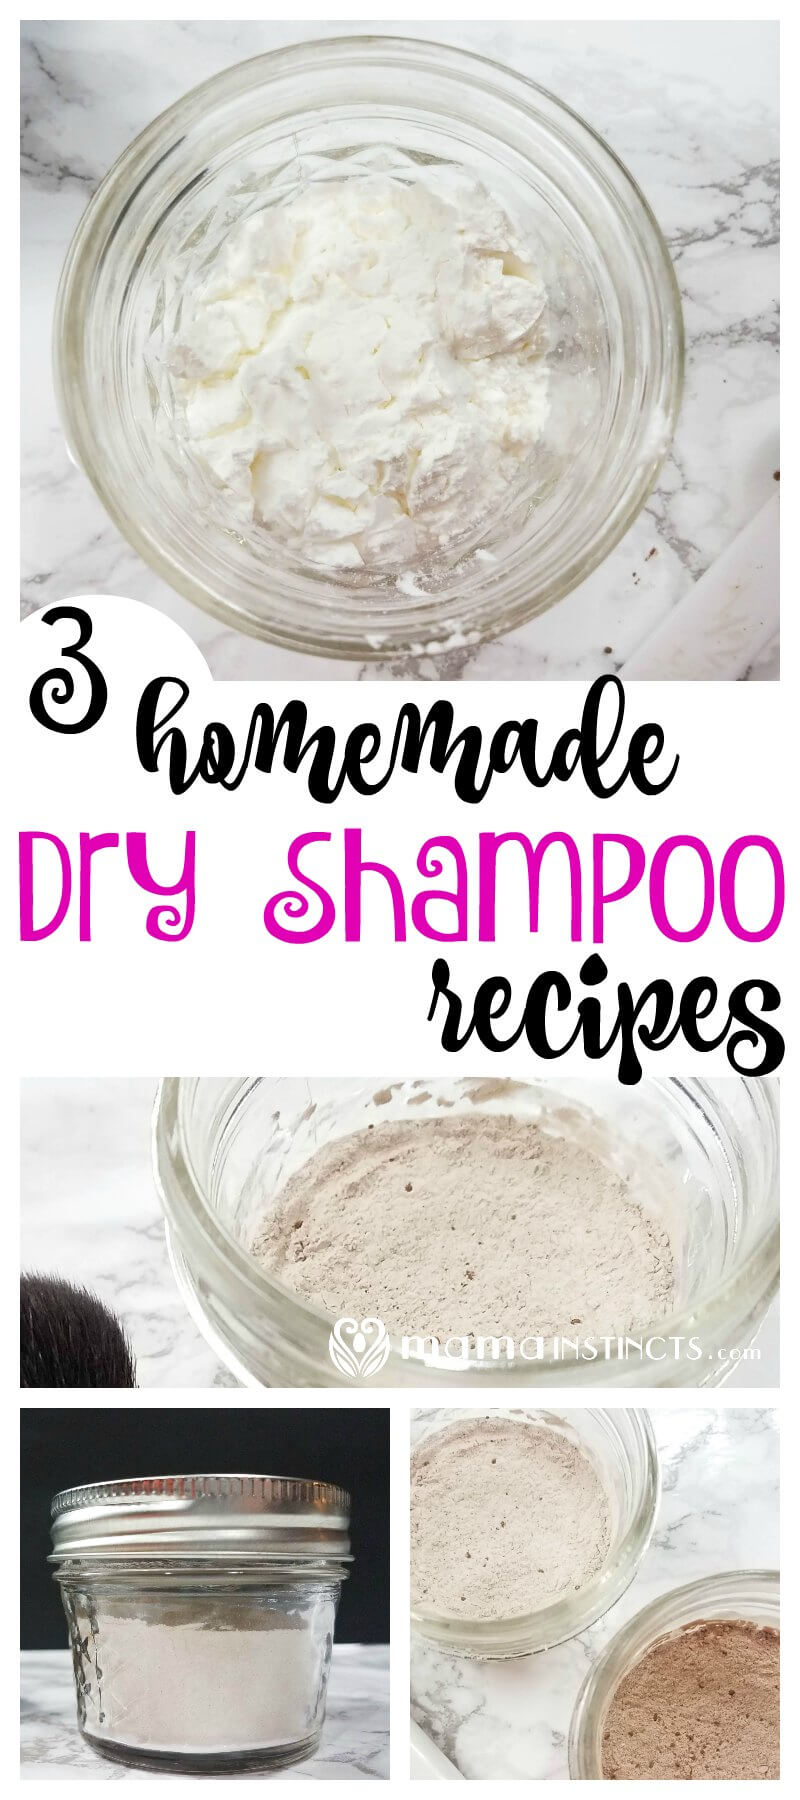 Did you know you can make safe and non-toxic dry shampoo with just one or two ingredients? Now you won't have to wash your hair every day but you can keep it looking fresh and clean with this diy homemade dry shampoo recipe. #DIY 